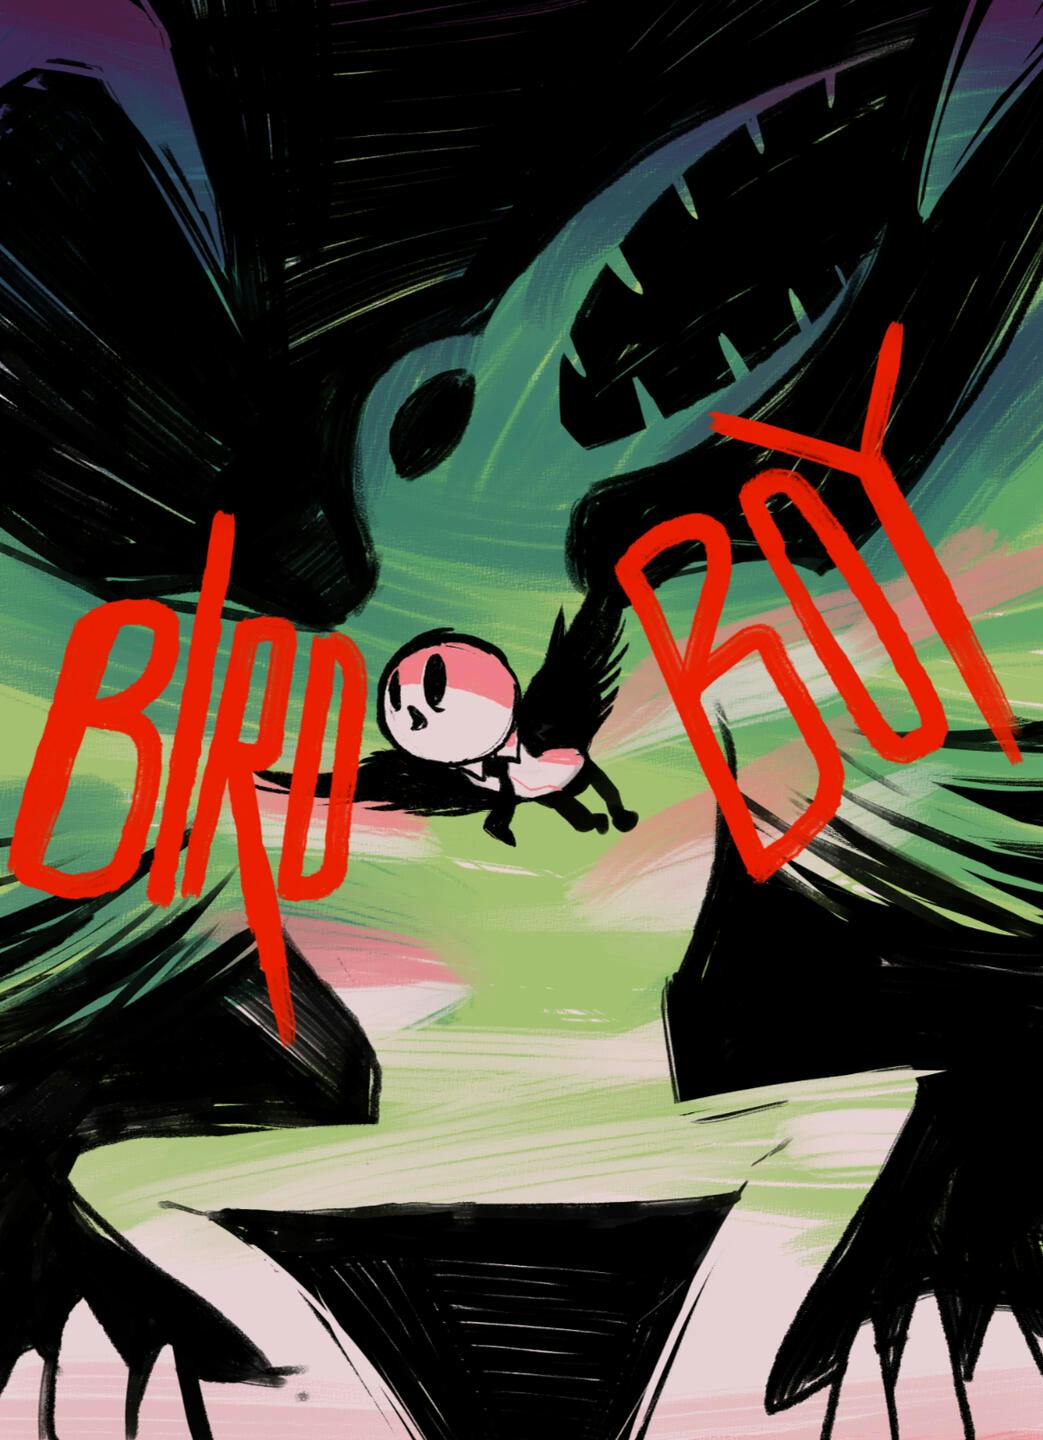 Illustration by Cholo Cabarroguis based on the film Bird Boy